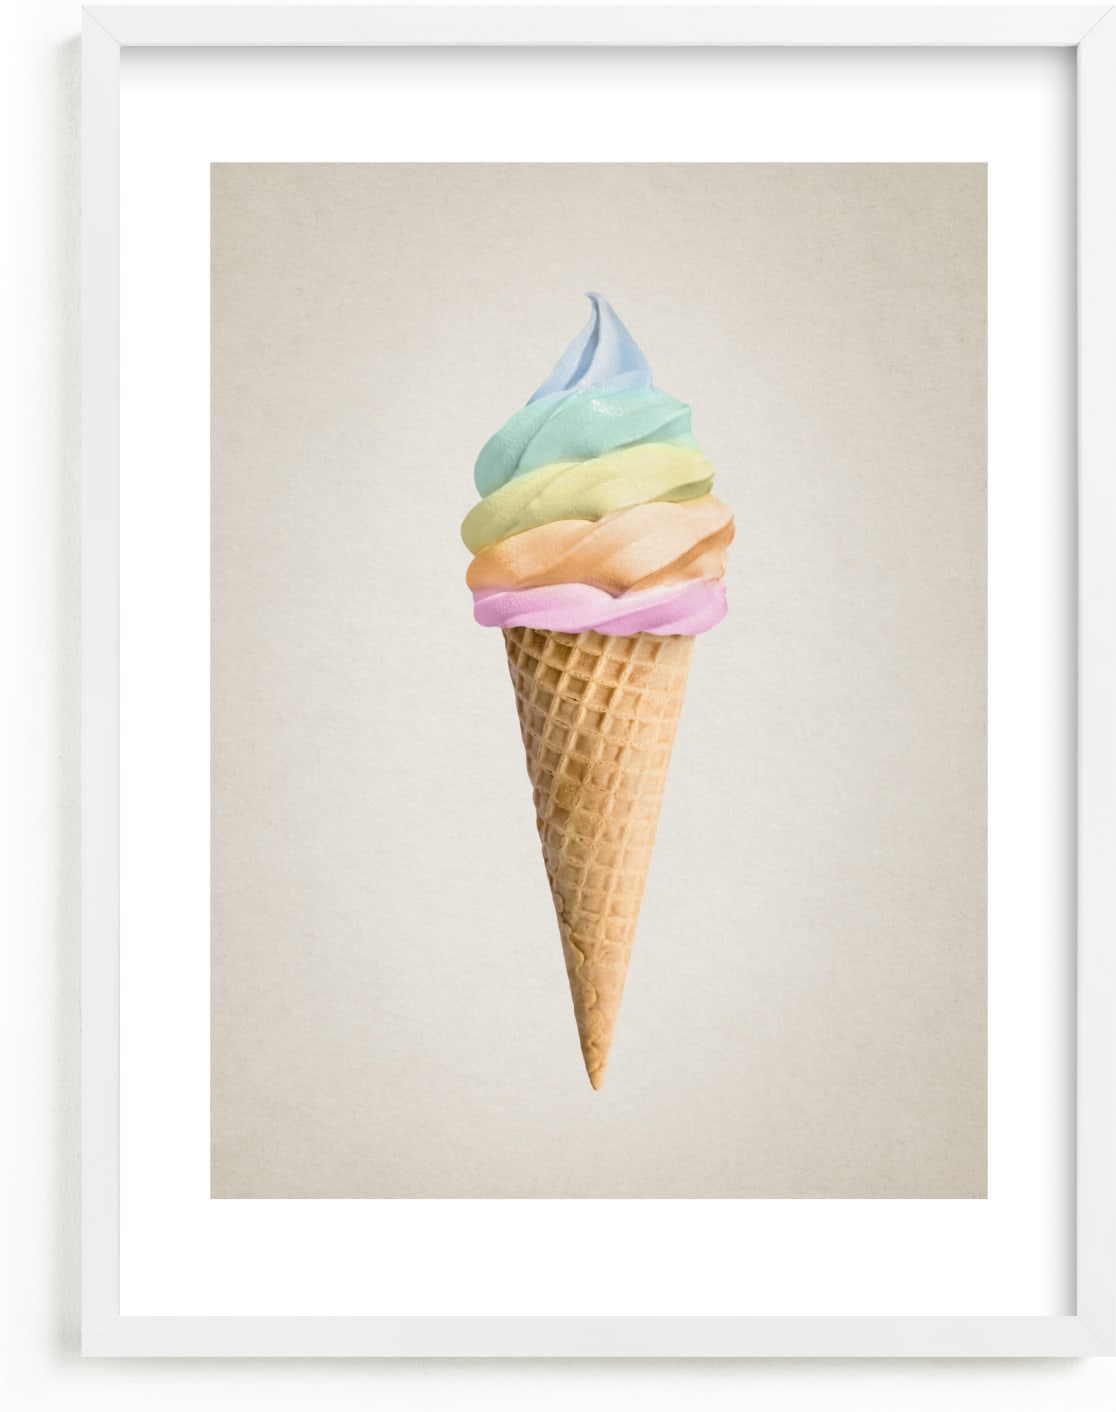 This is a colorful art by Paola Benenati called Rainbow Ice Cream.